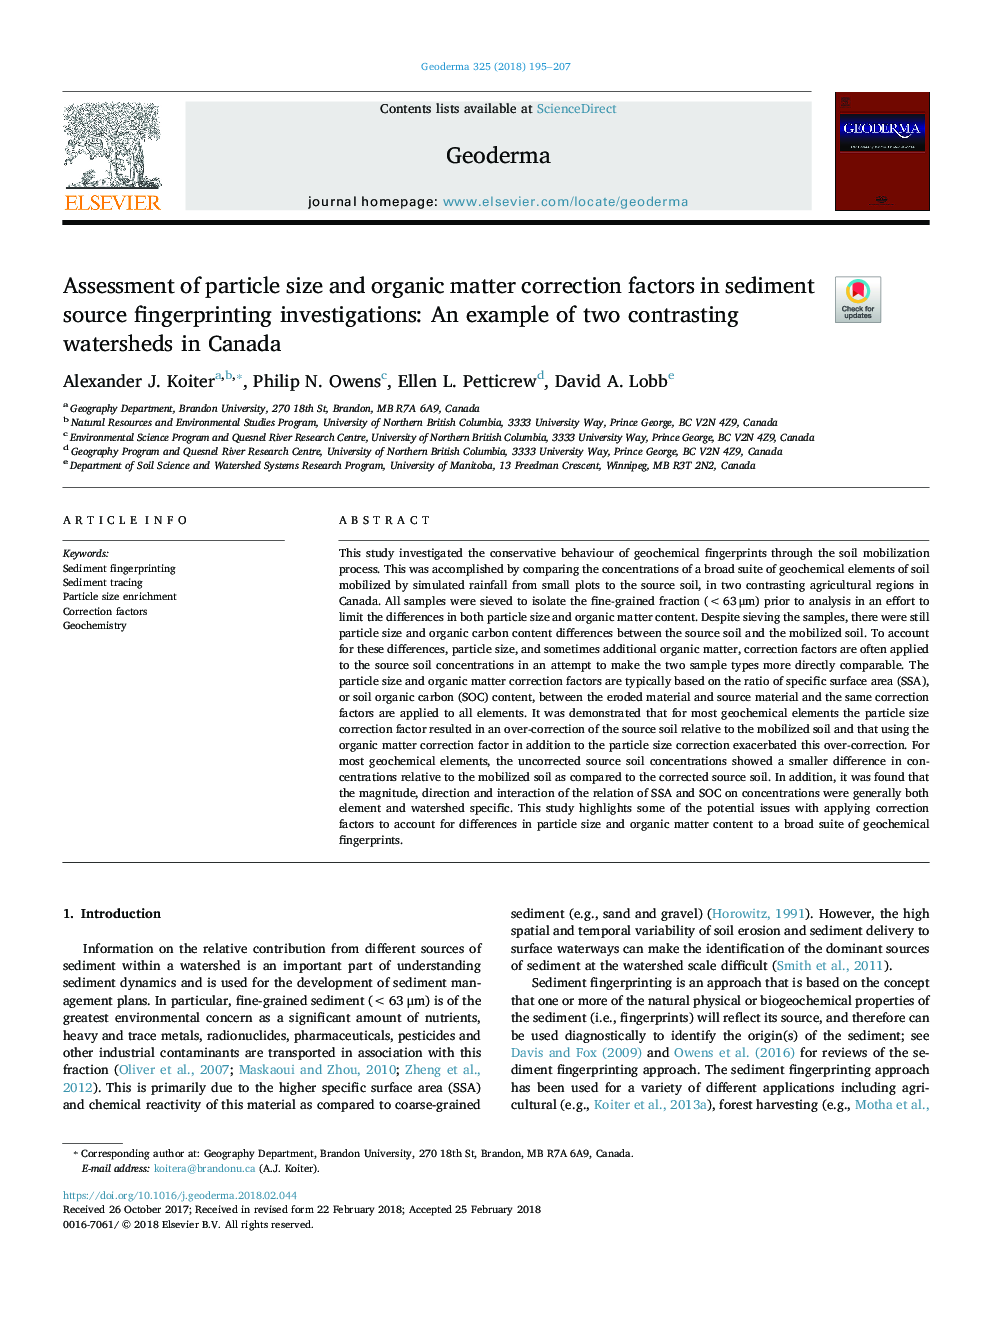 Assessment of particle size and organic matter correction factors in sediment source fingerprinting investigations: An example of two contrasting watersheds in Canada